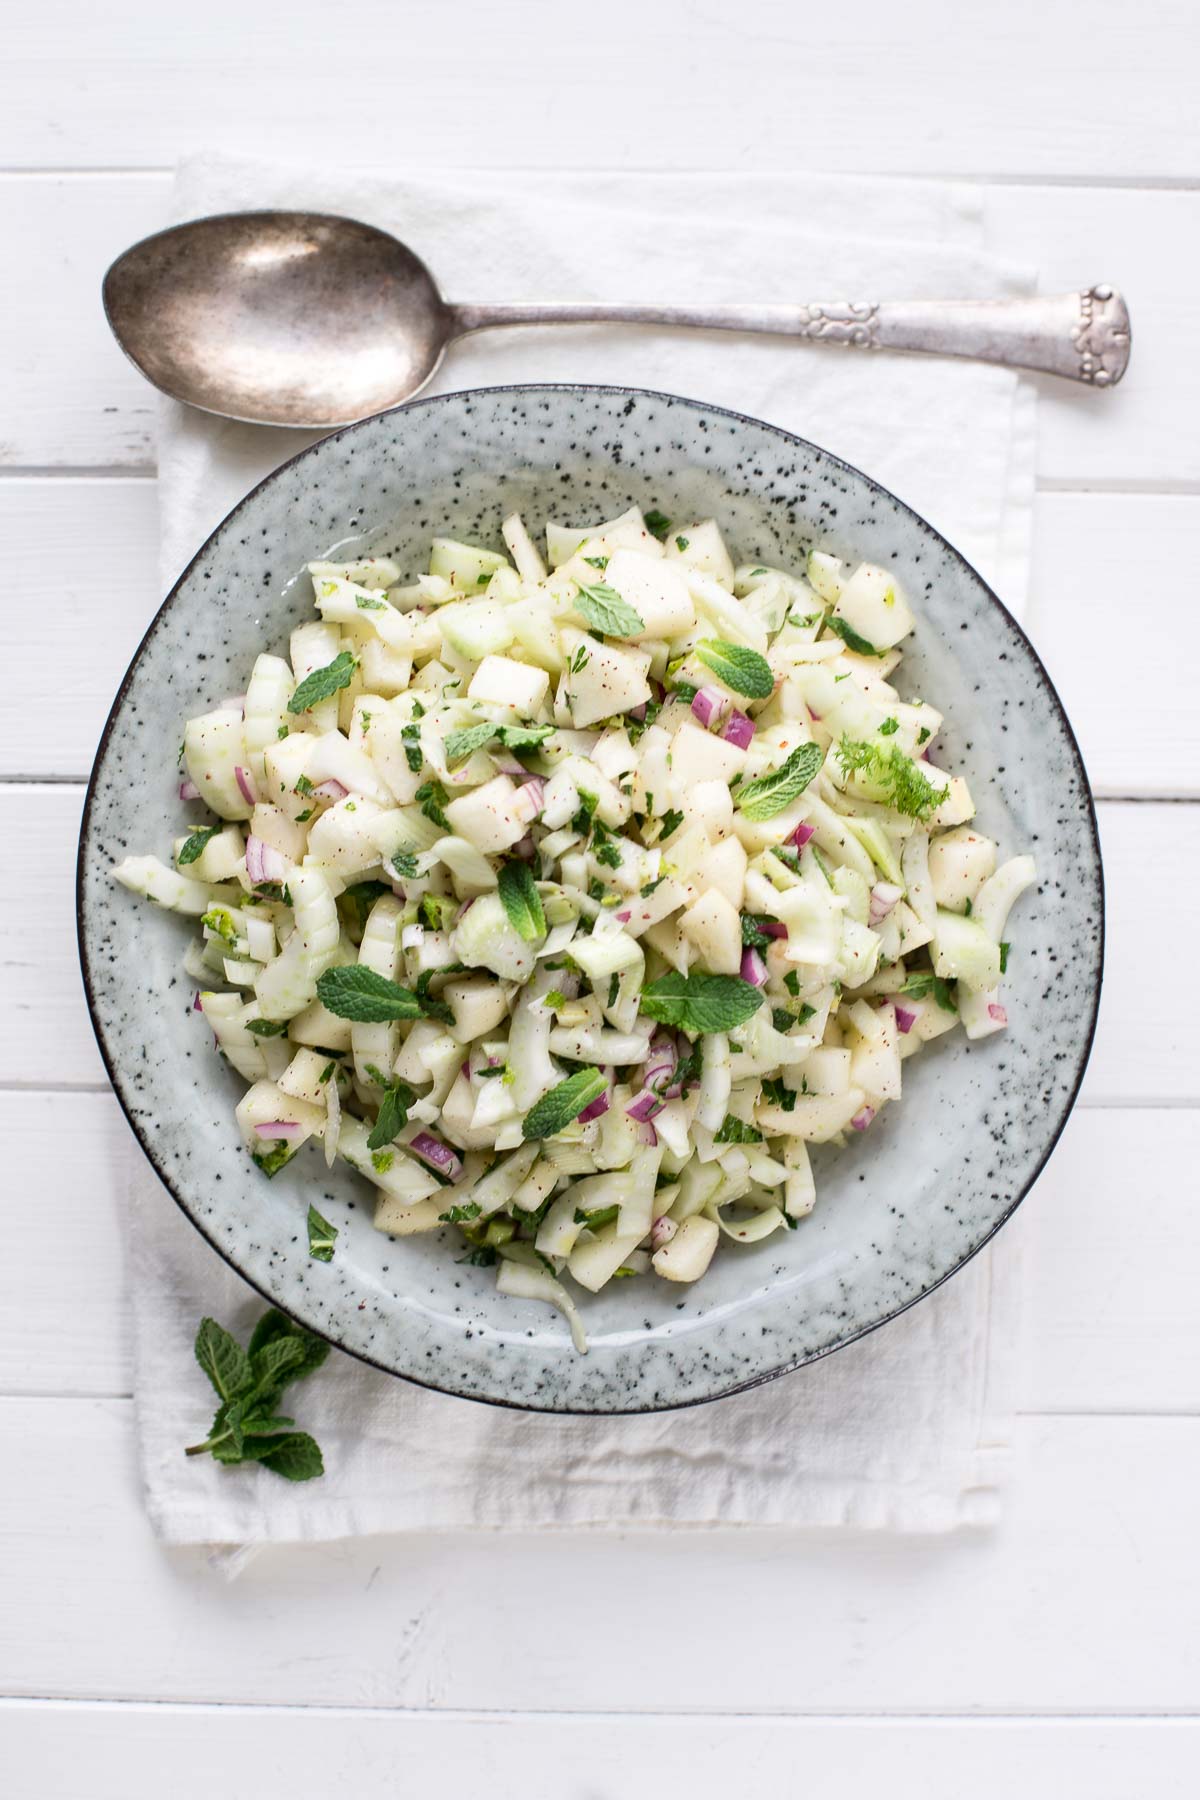 Pear Fennel Salad with Sumac and Mint